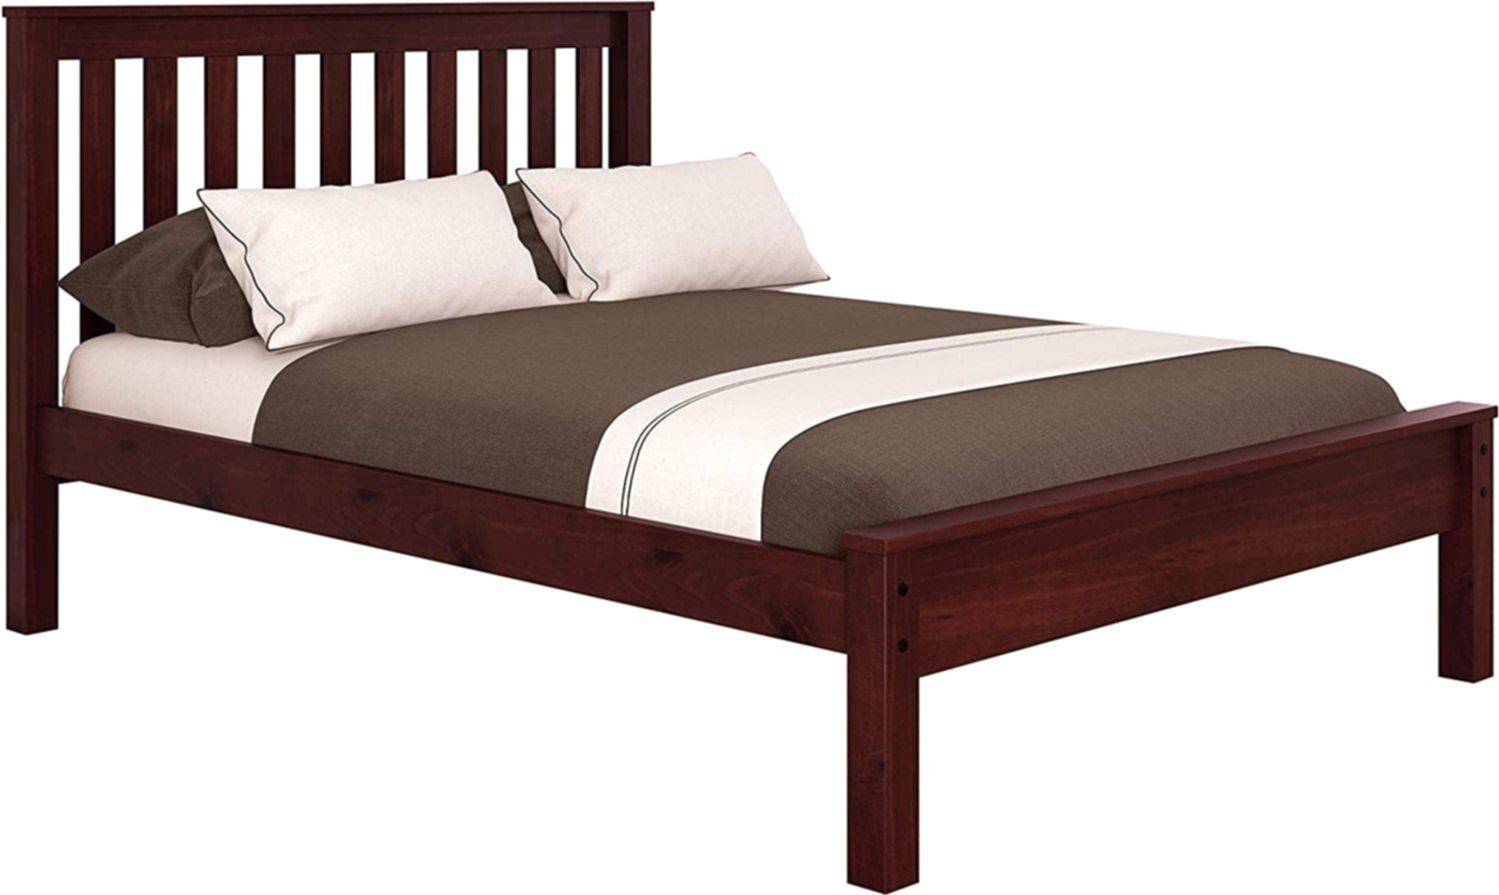 Picture of Contempo Full Bed